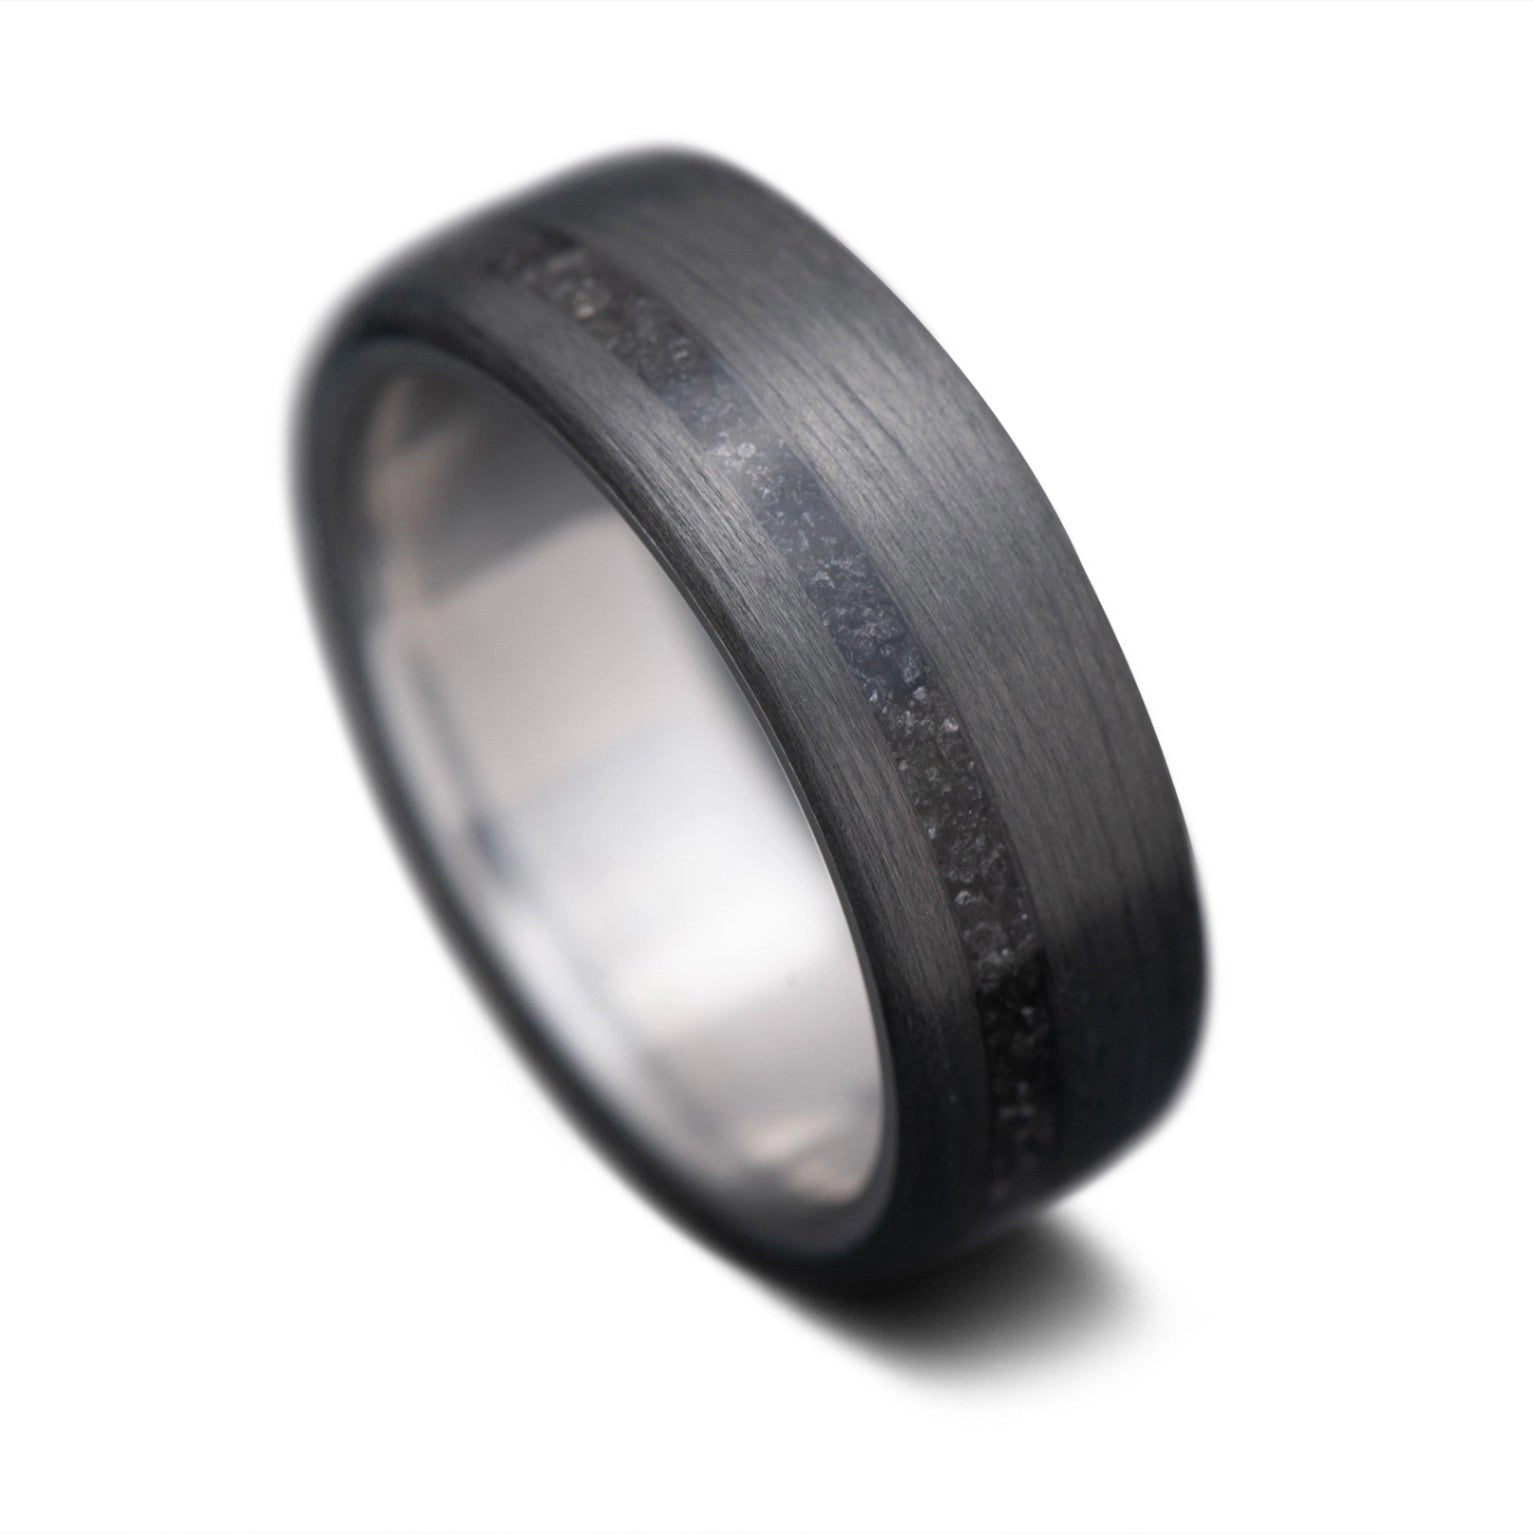 CarbonUni Core ring with Black Onyx inlay and  Titanium inner sleeve, 8mm -THE VERTEX